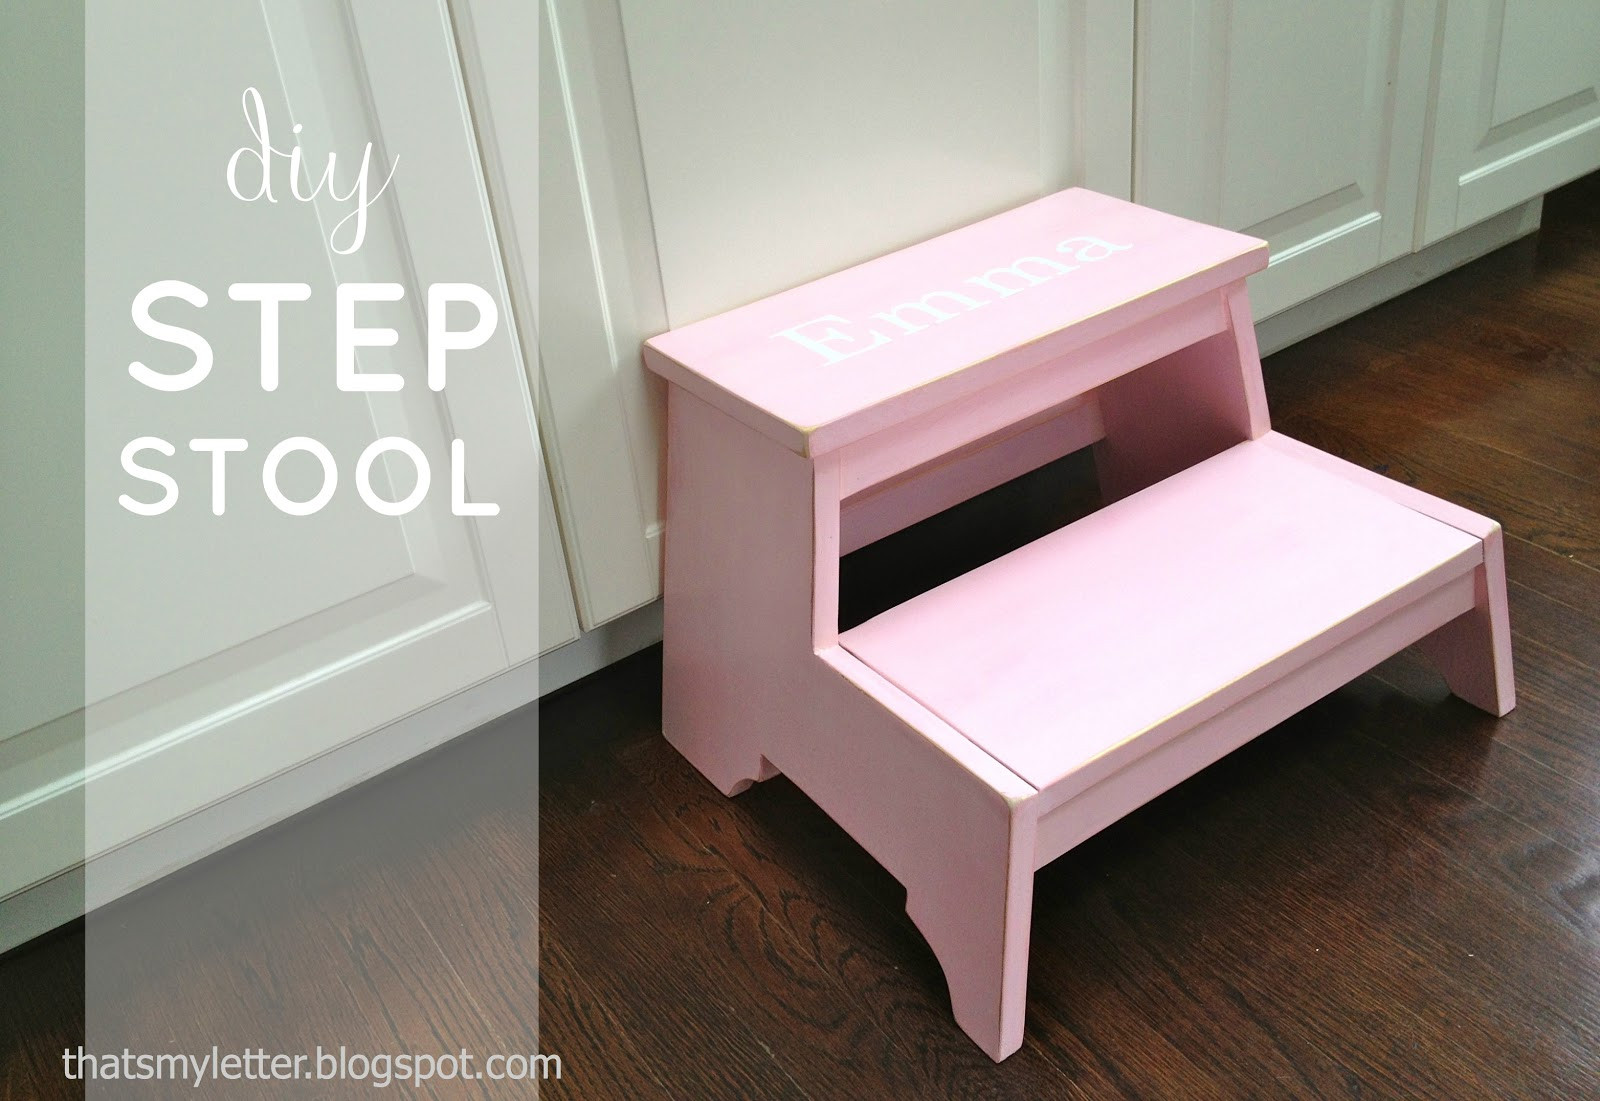 DIY Step Stool For Toddler
 That s My Letter "K" is for Kids Step Stool